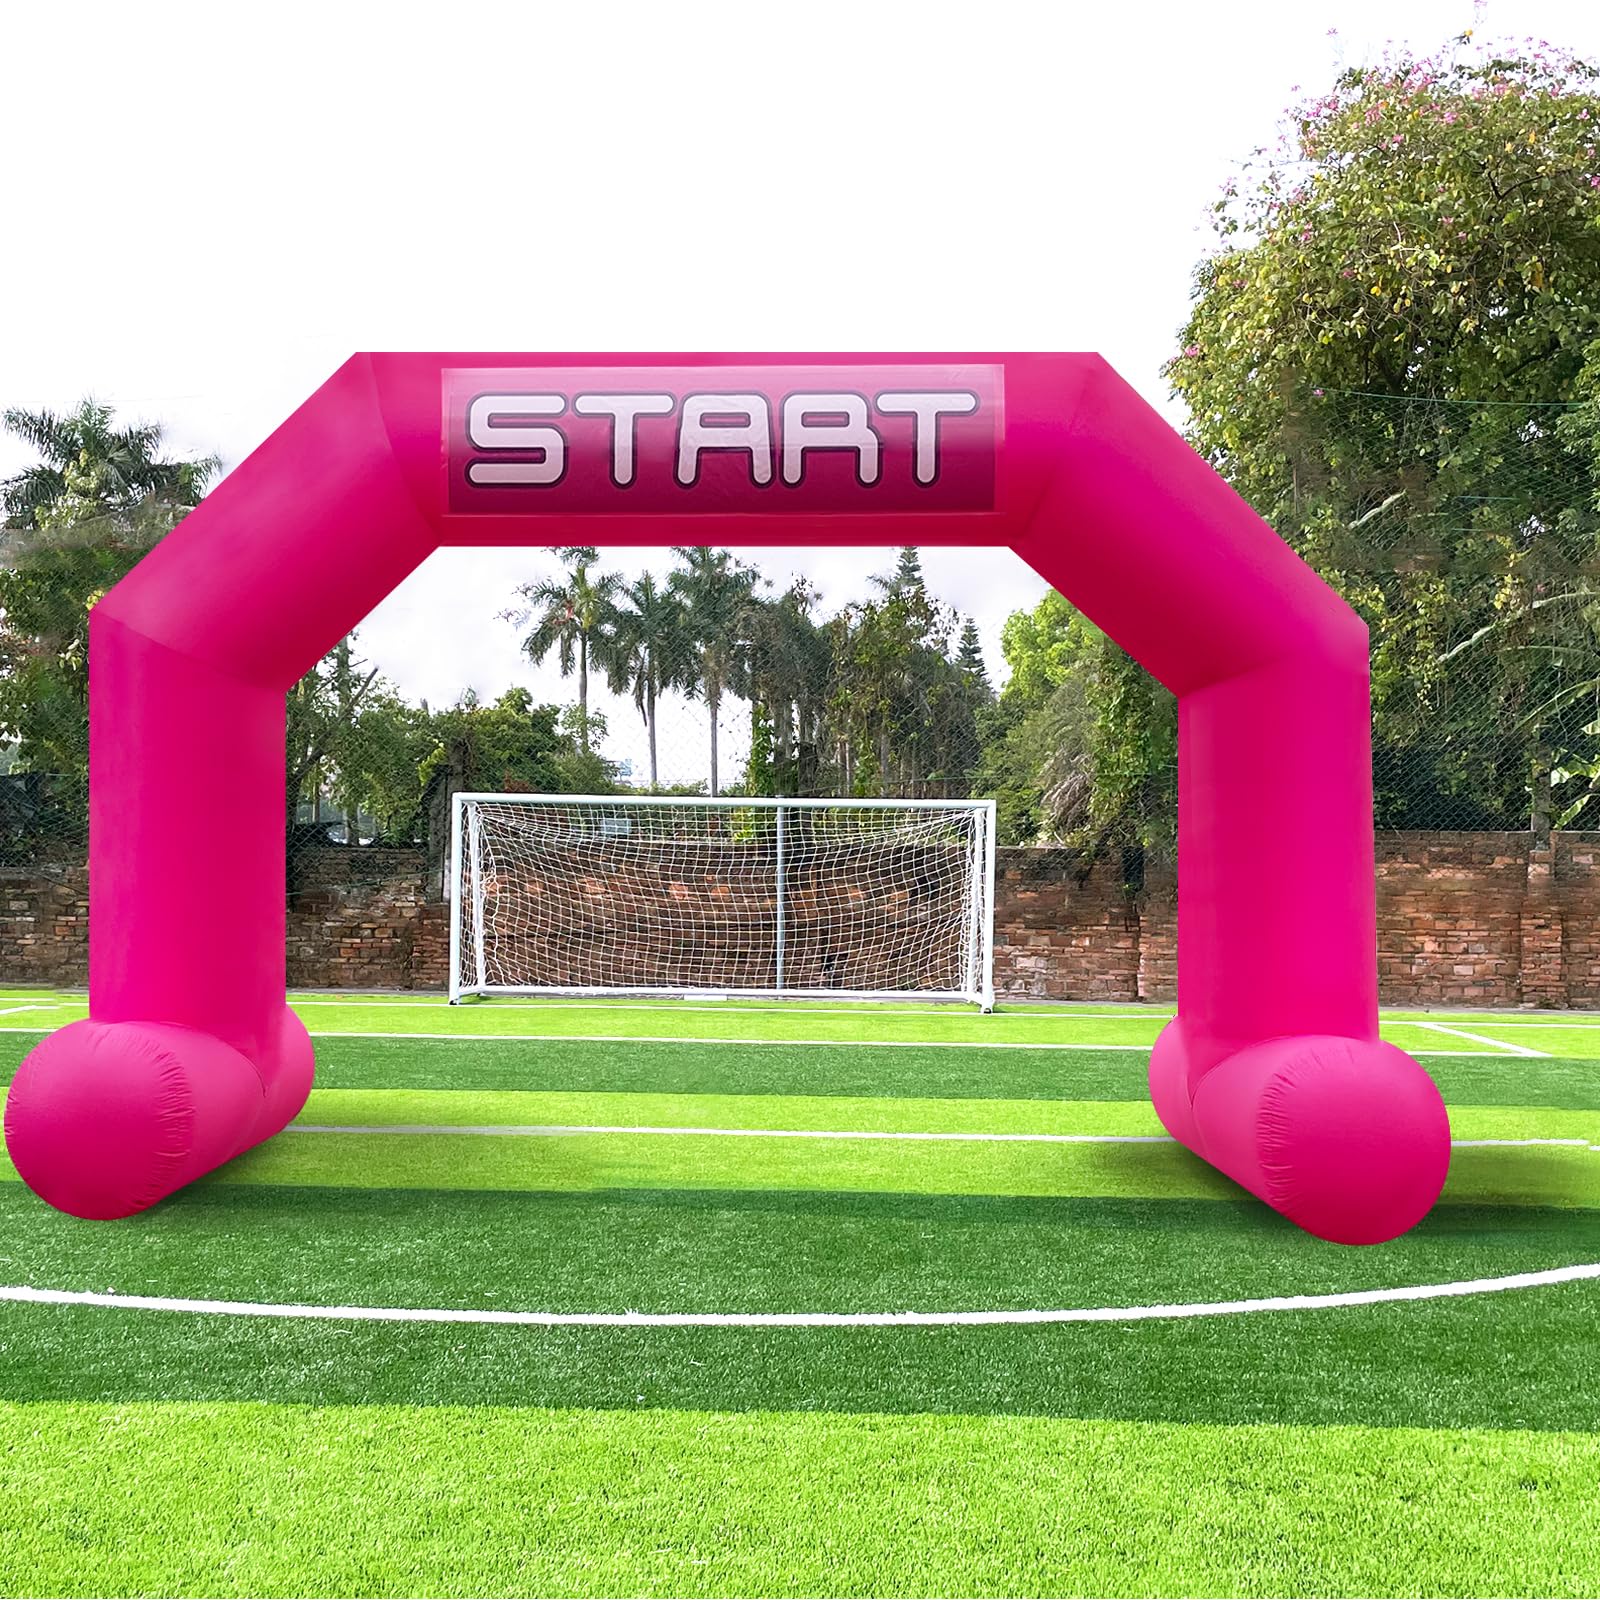 Sewinfla 20ft Inflatable Start Finish Line Arch Pink with External 250W Blower, Outdoor Inflatable Archway for Party Race Advertising Commerce